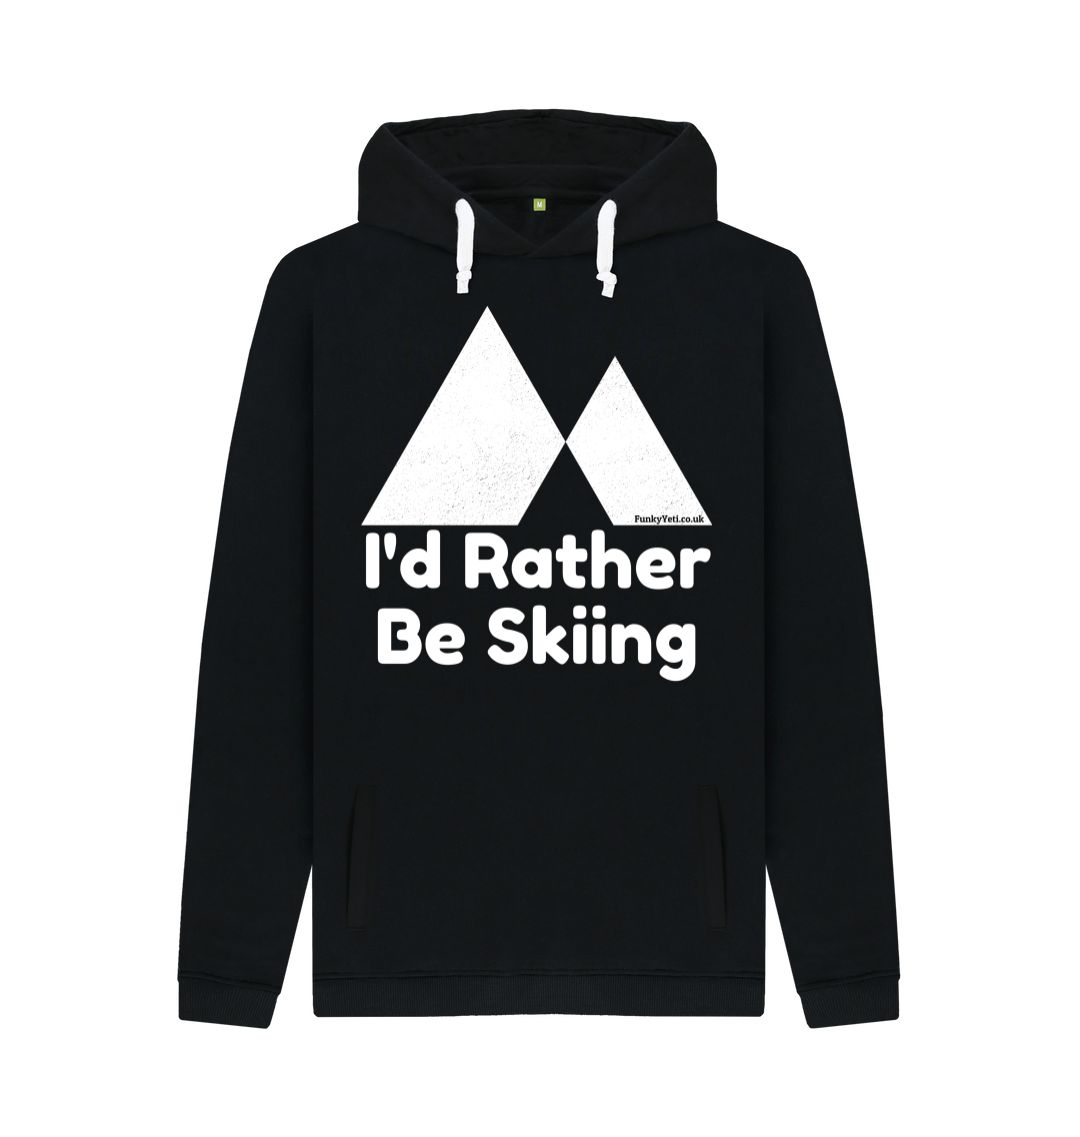 Black Funky Yeti Men's Pullover Hoodie - I'd Rather Be Skiing